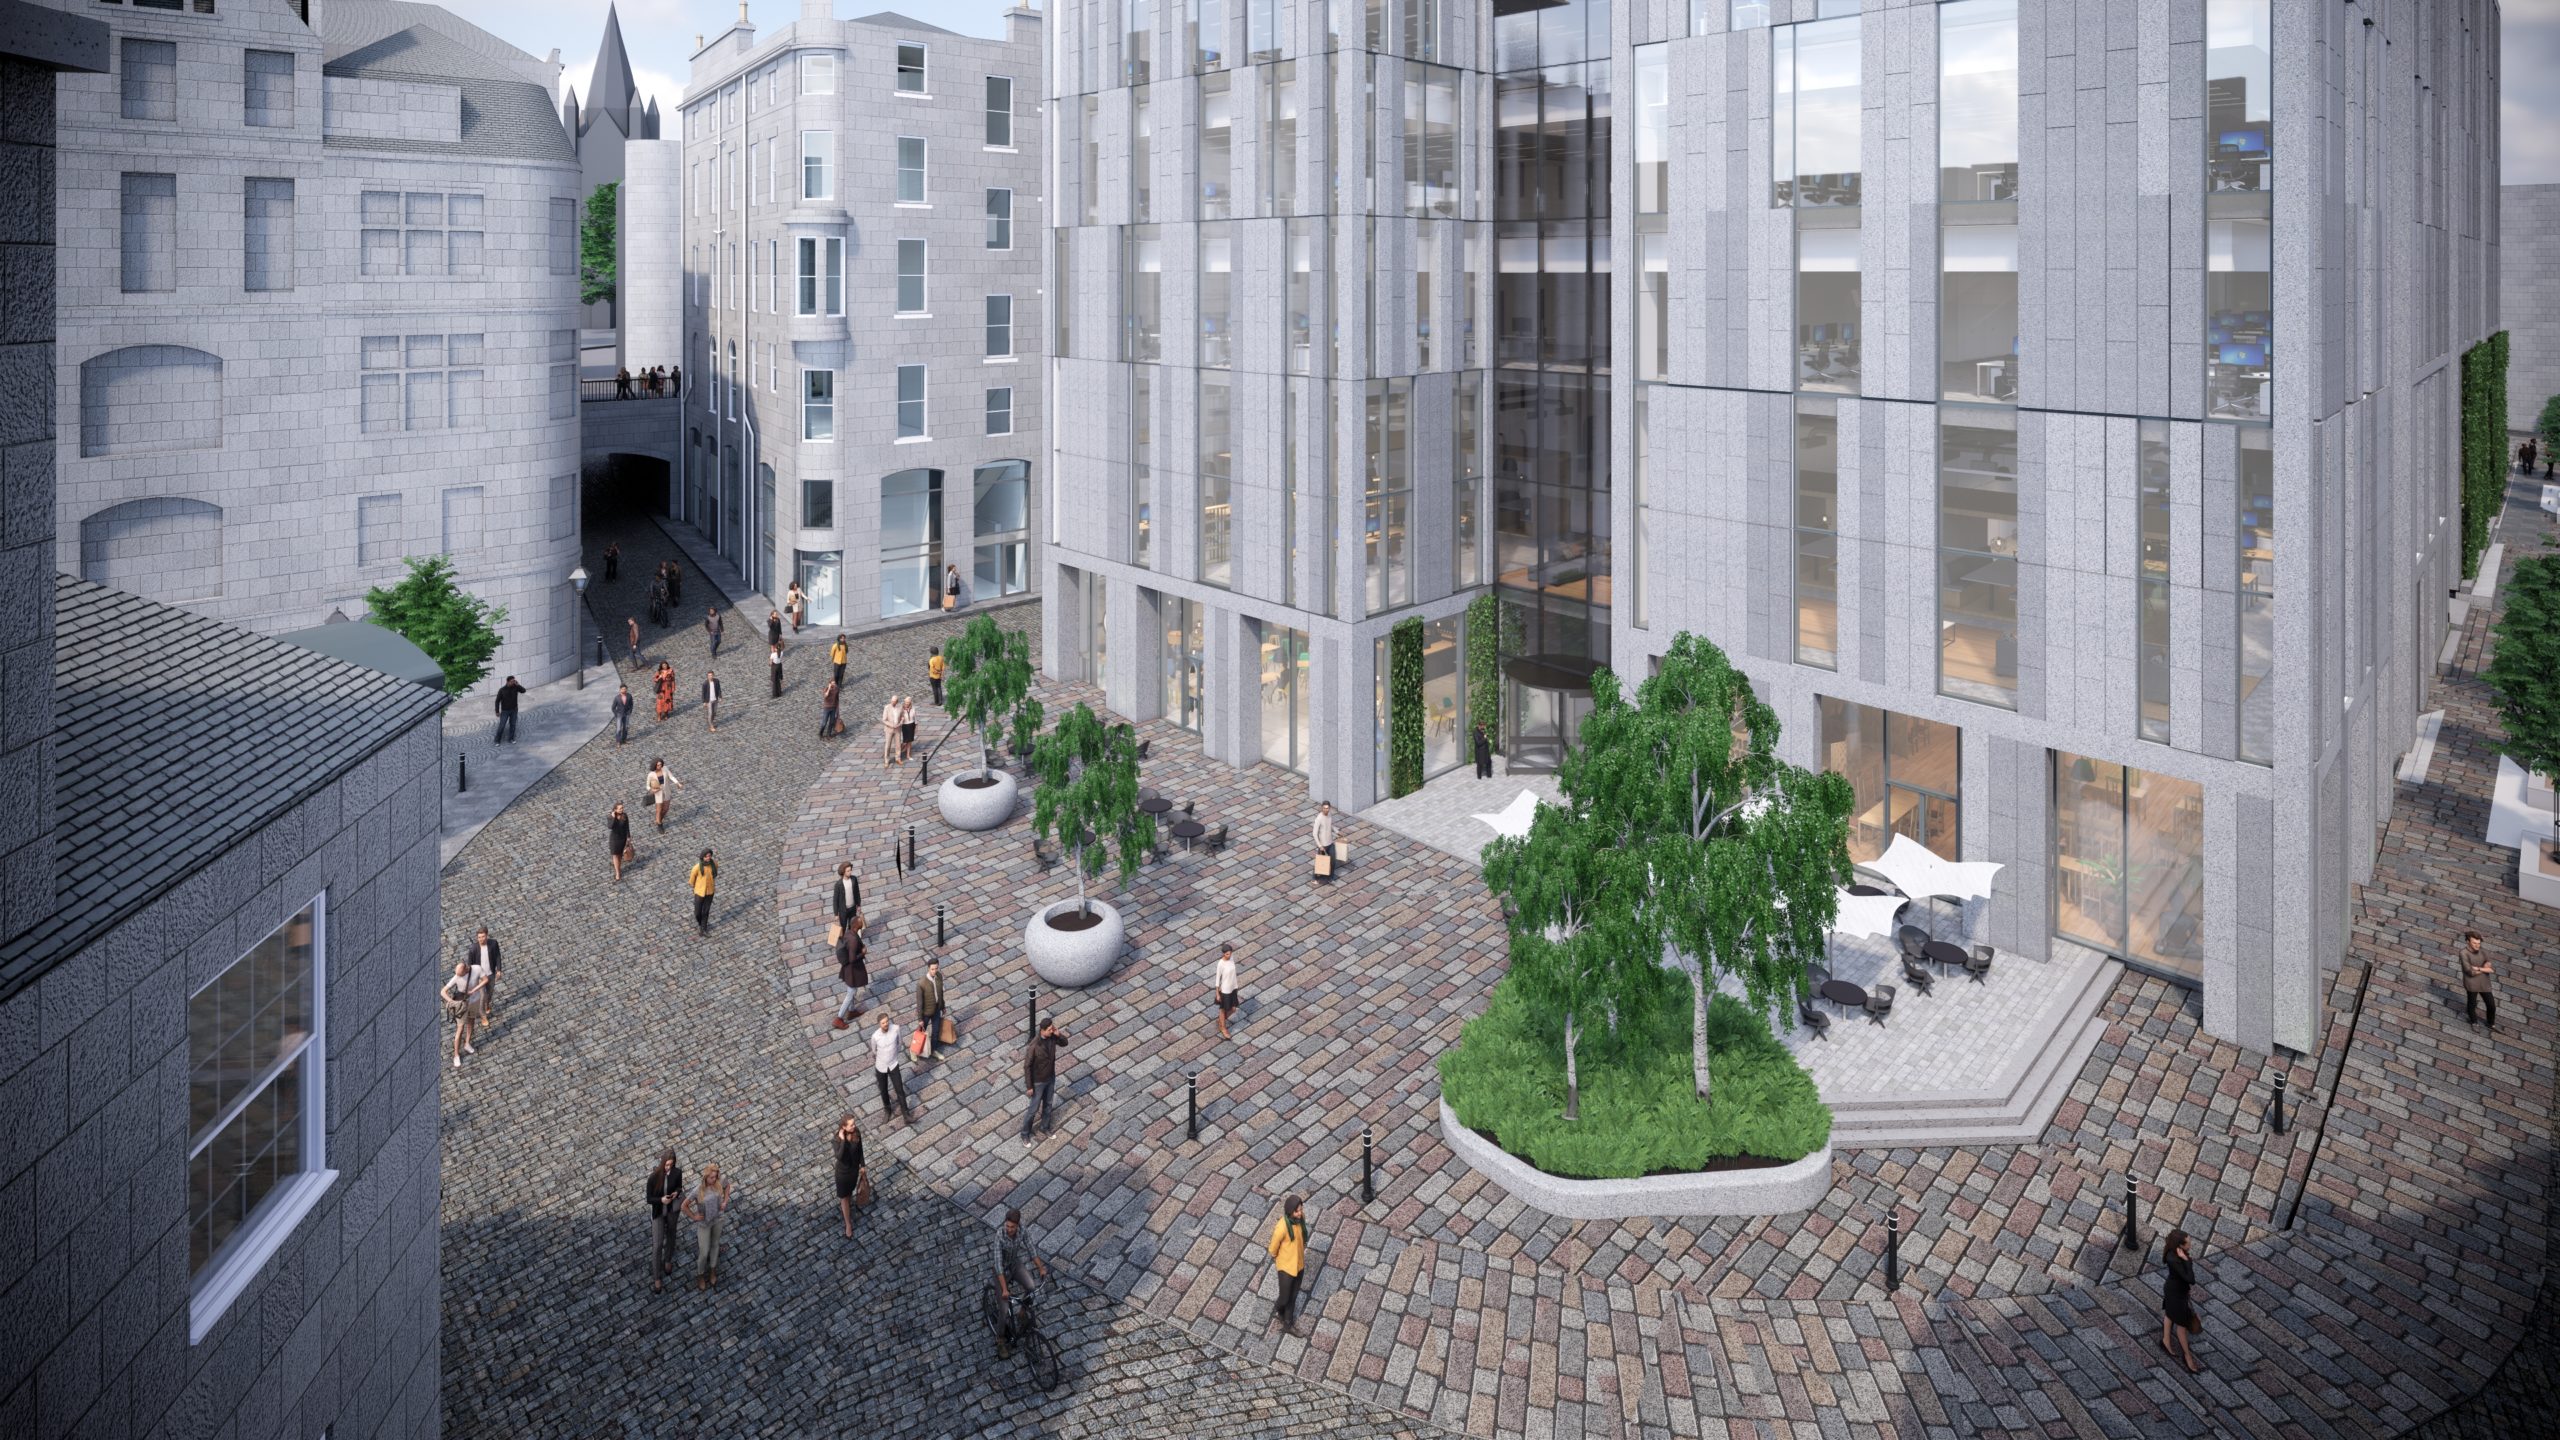 An artistic's impression of the proposed building on the site of Aberdeen Market.